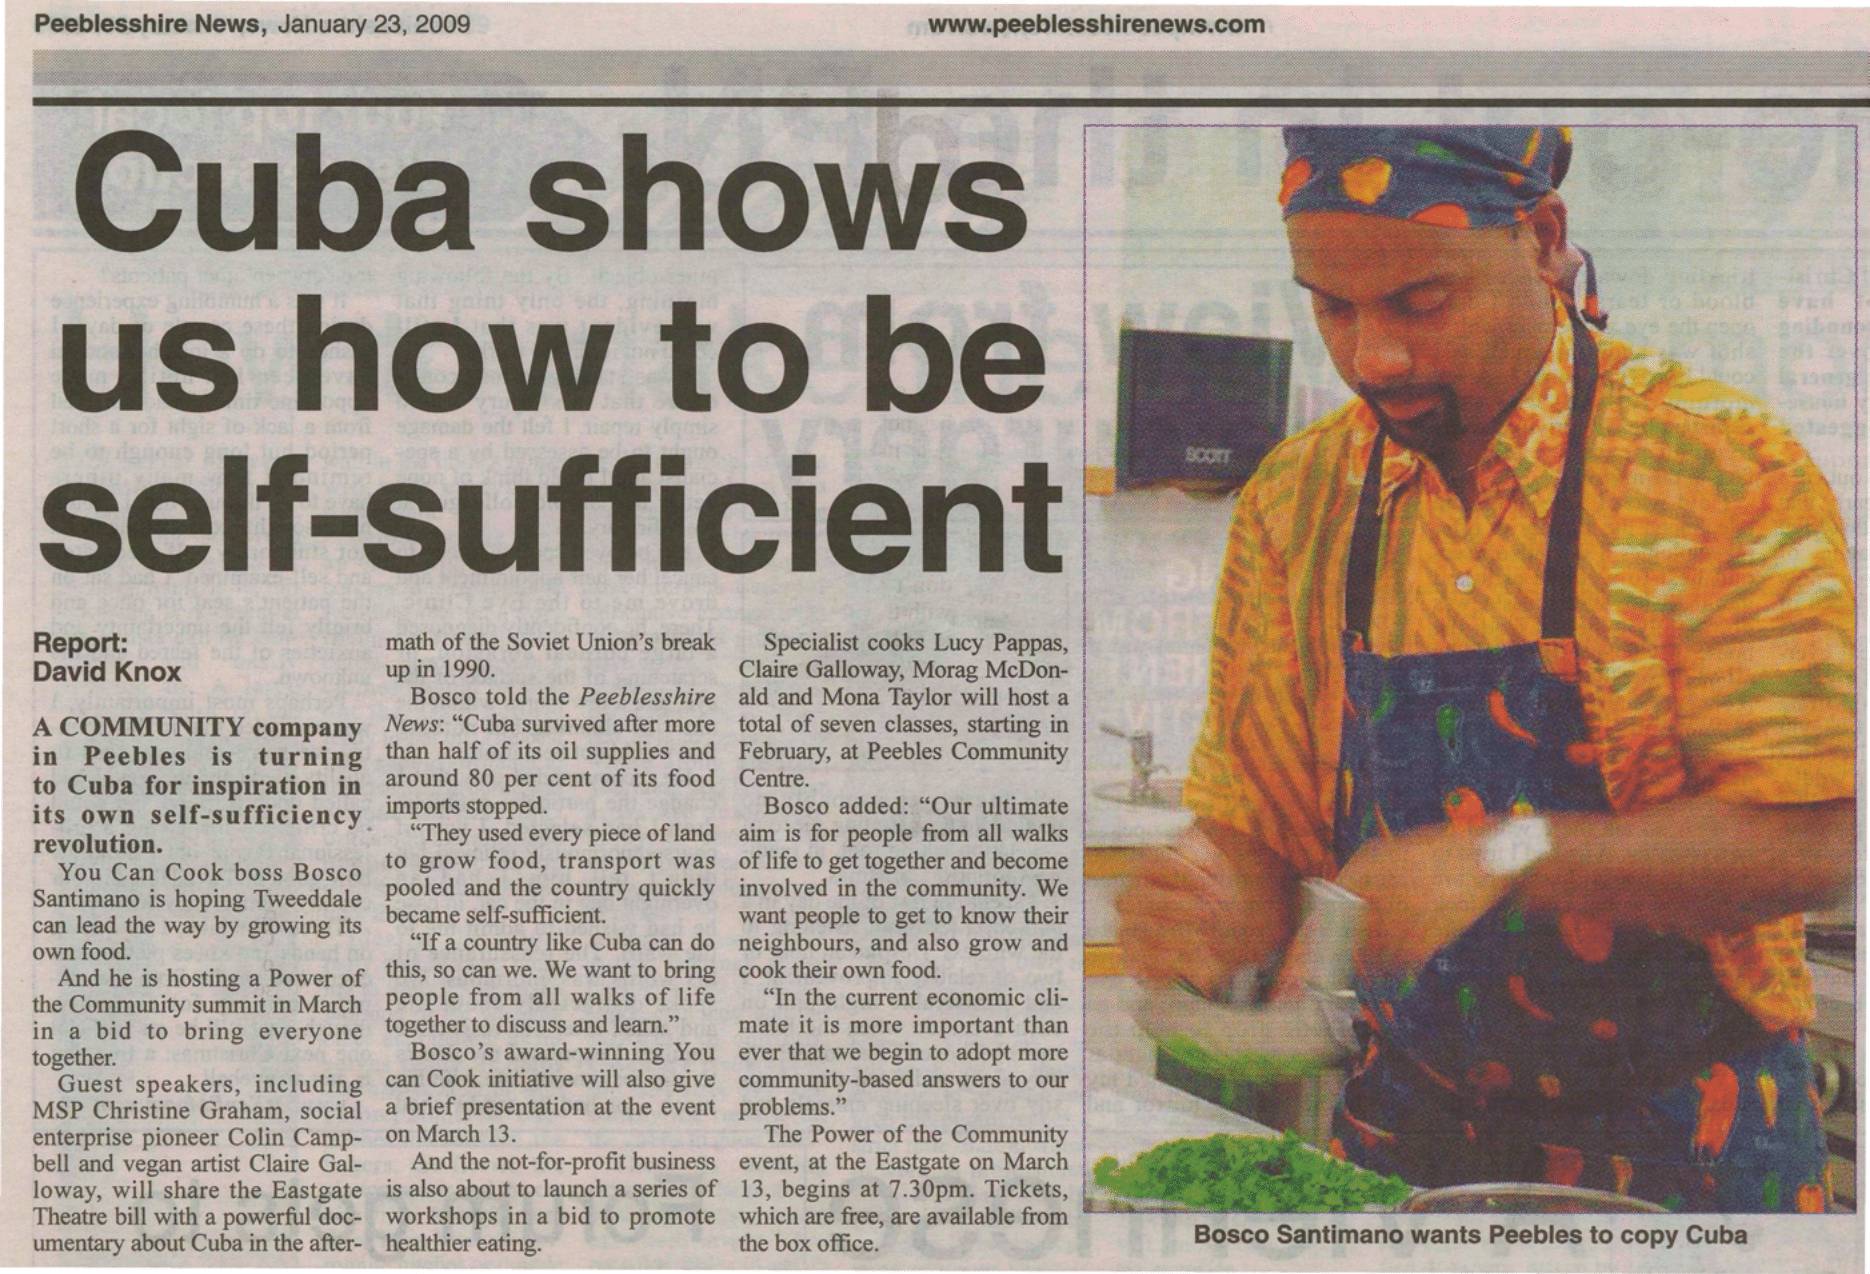 Press Clipping: Cuba shows us how to be self-sufficient